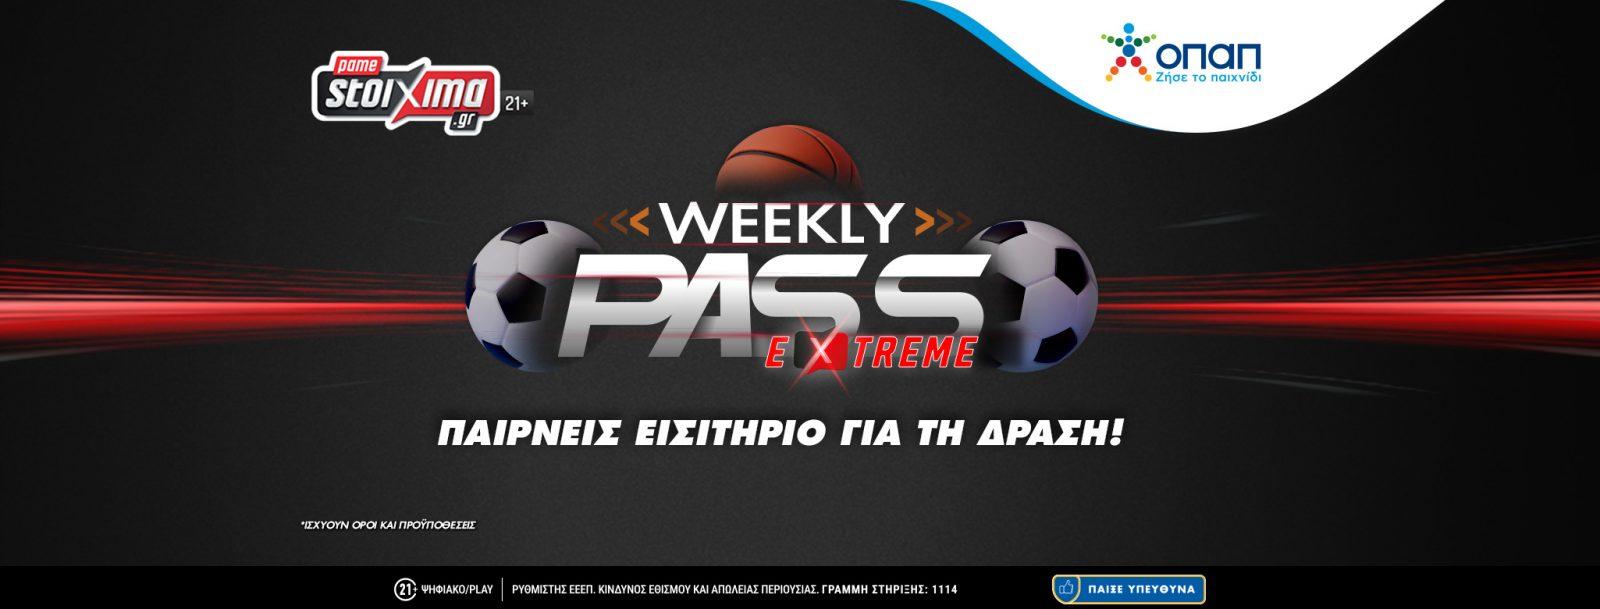 Europa League & Weekly Pass Extreme